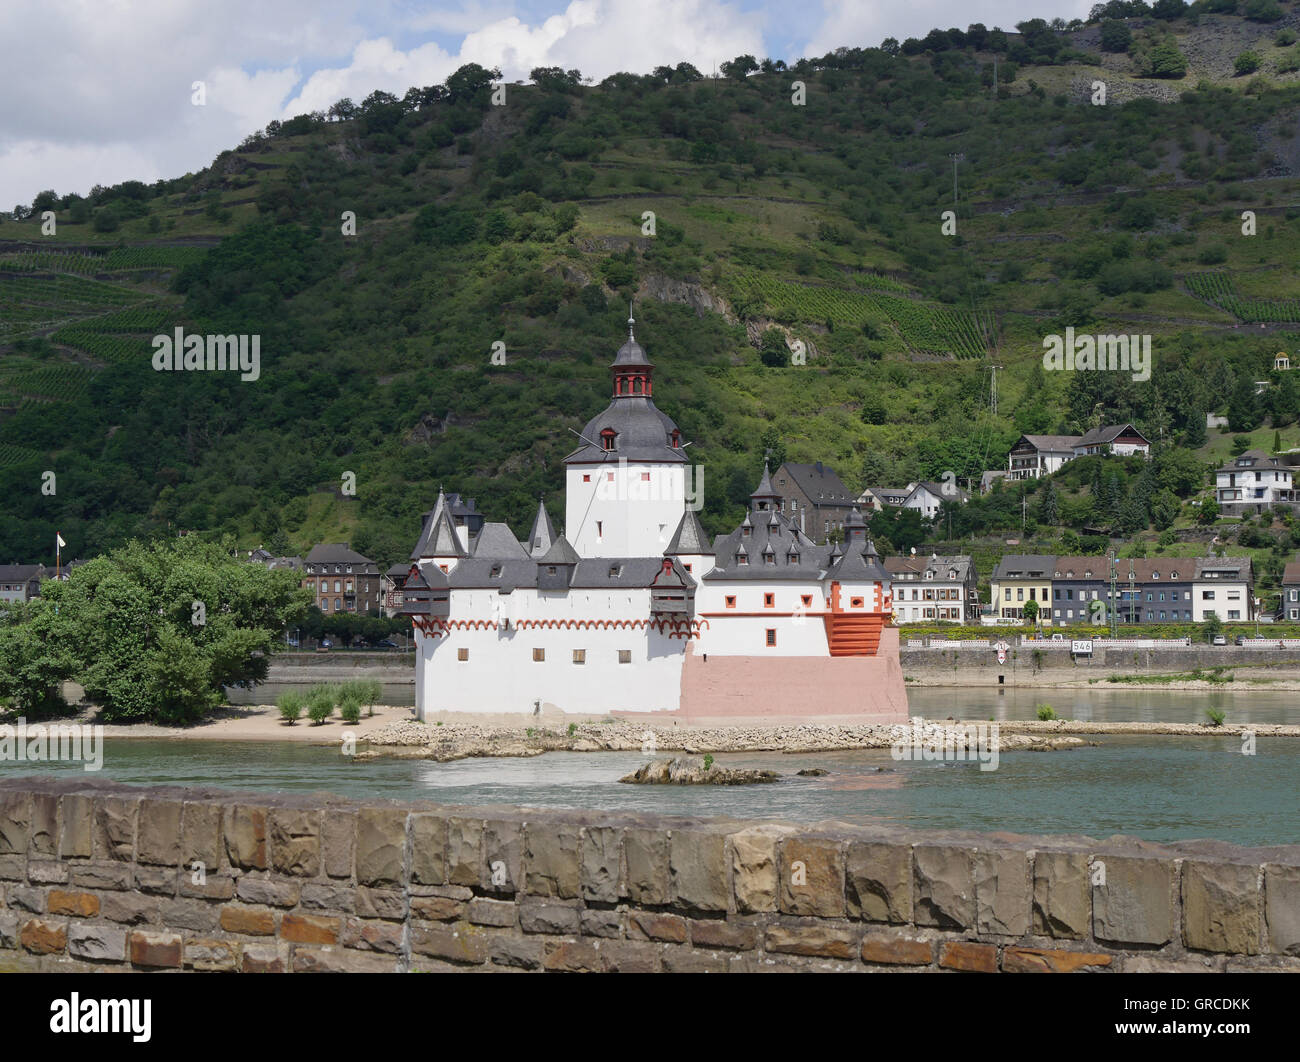 Pfalzgrafenstein Castle On The Island Of Falkenau In The Rhine, Formerly A Toll Castle In The Upper Middle Rhine Valley, Also Called Pfalz Bei Kaub Stock Photo